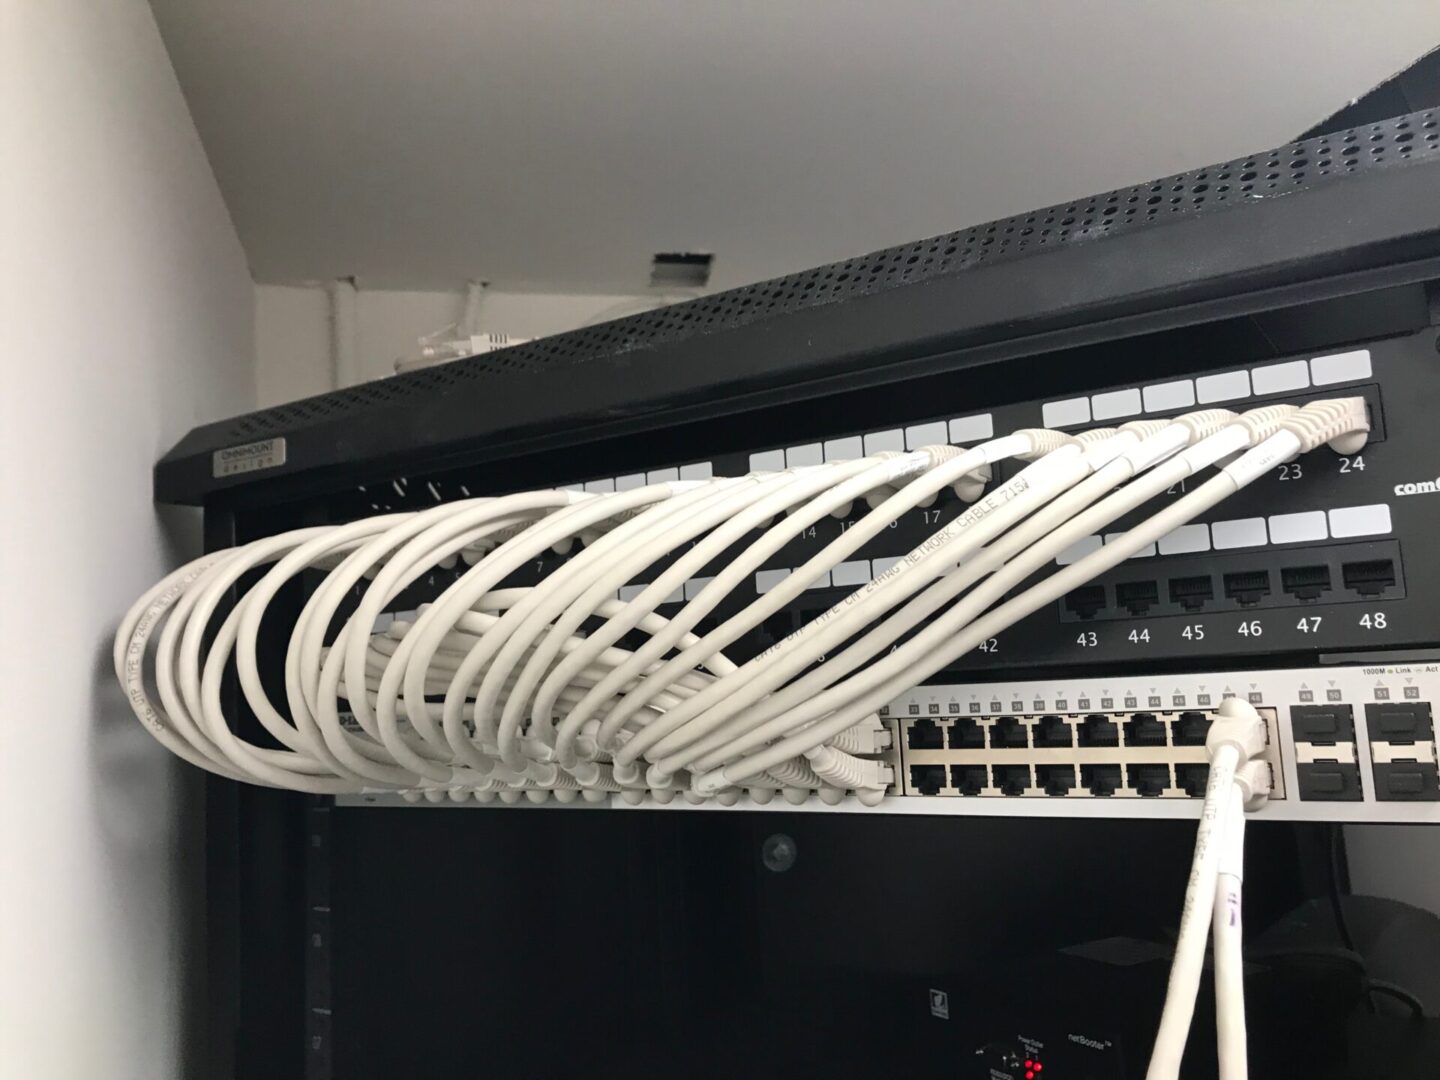 A bunch of wires hanging from the side of a rack.